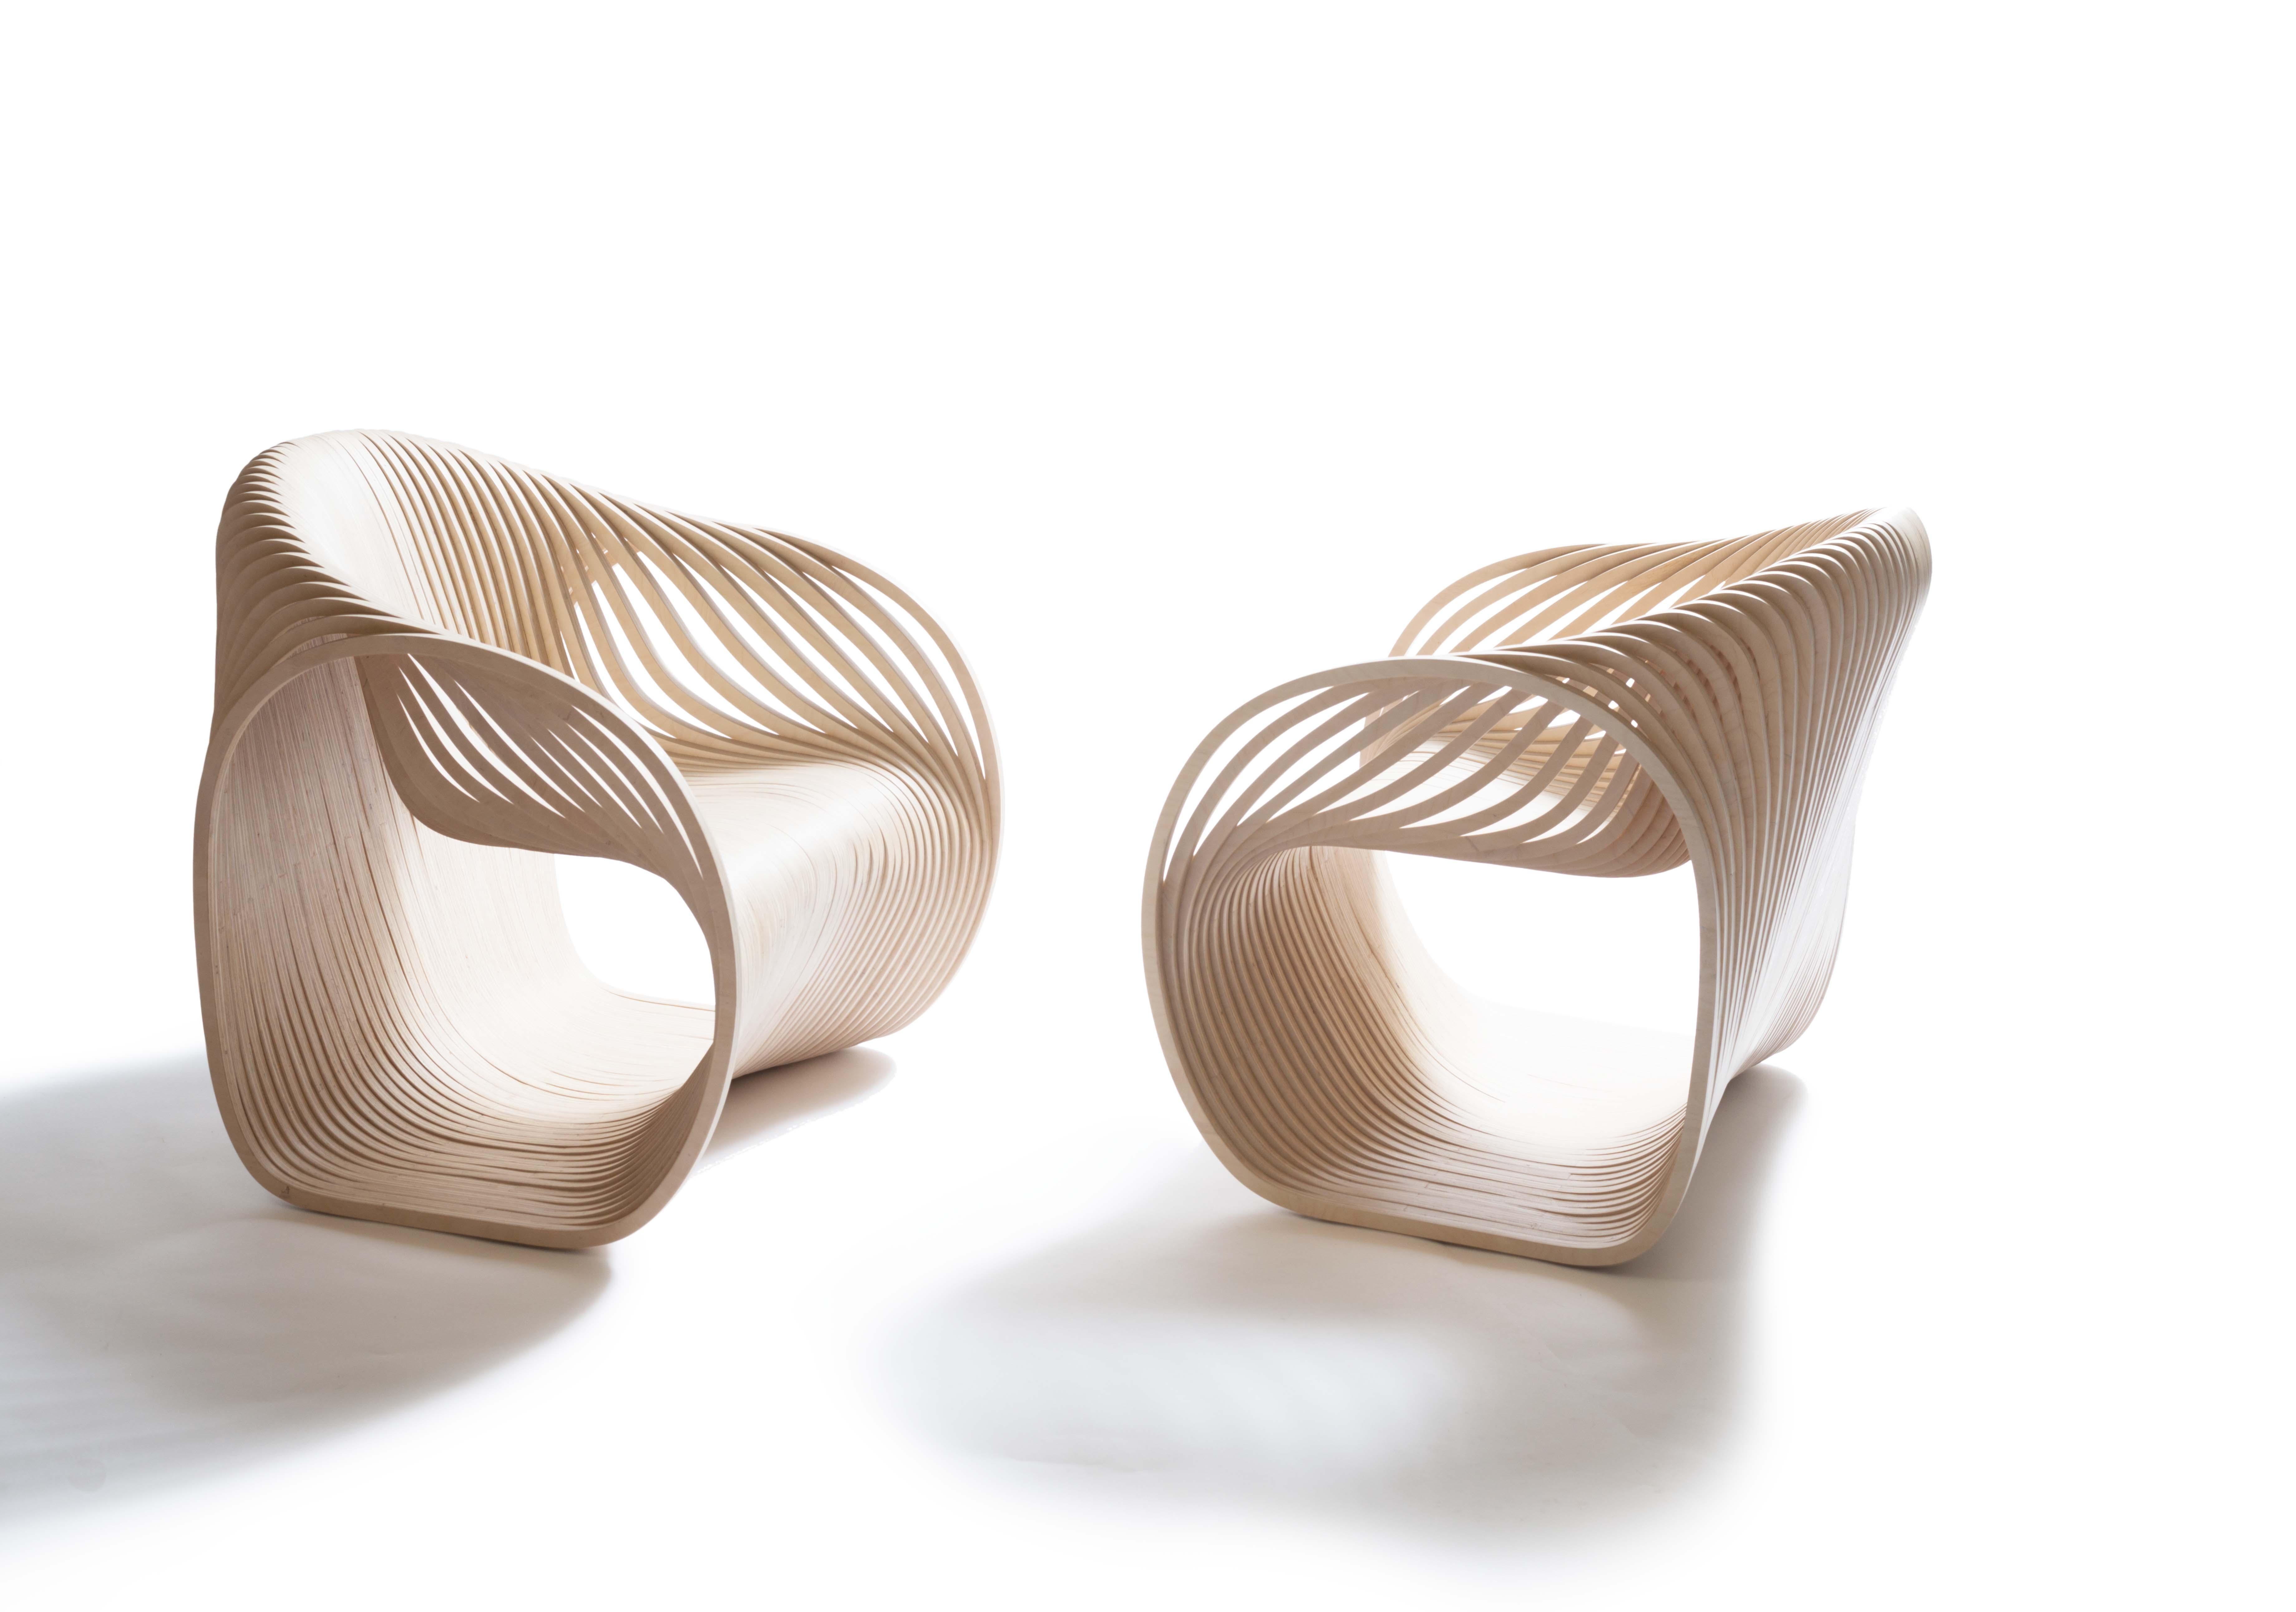 Piegatto Designed the Soave Chair / #soavechair in 2018 and was registered in 2019. 
This chair was presented in a temple in Japan in 2019. 

A chair
with feelings
waving hi
or goodbye
the act of
waving expressed
in the details
of the Soave